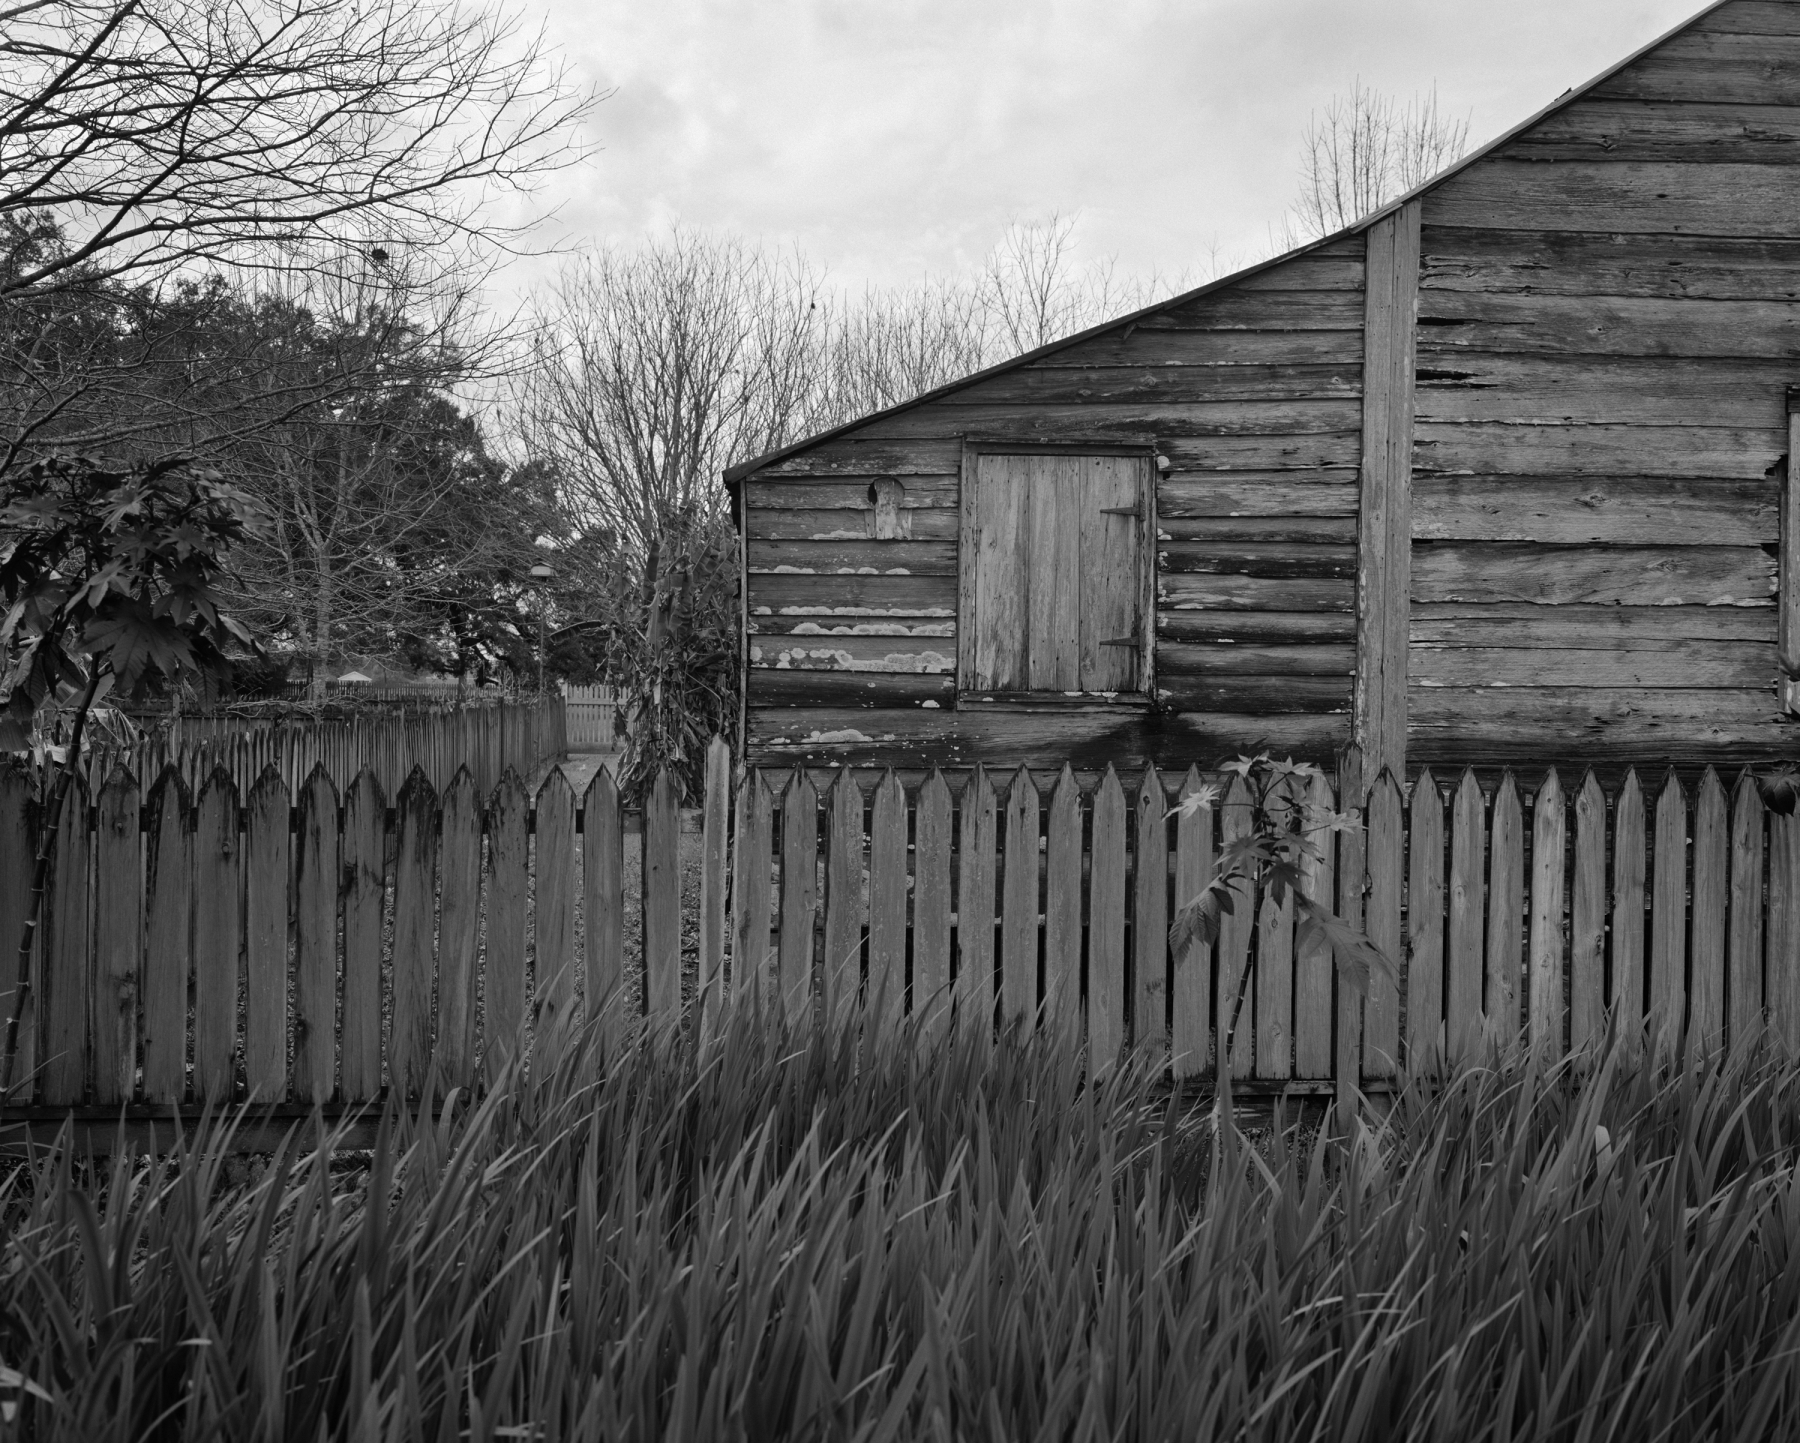 Tall Grass, Fence, and Cabin, 2019
gelatin silver print
edition of 6 with 2 APs
(DB-ITHP.19.16.3)